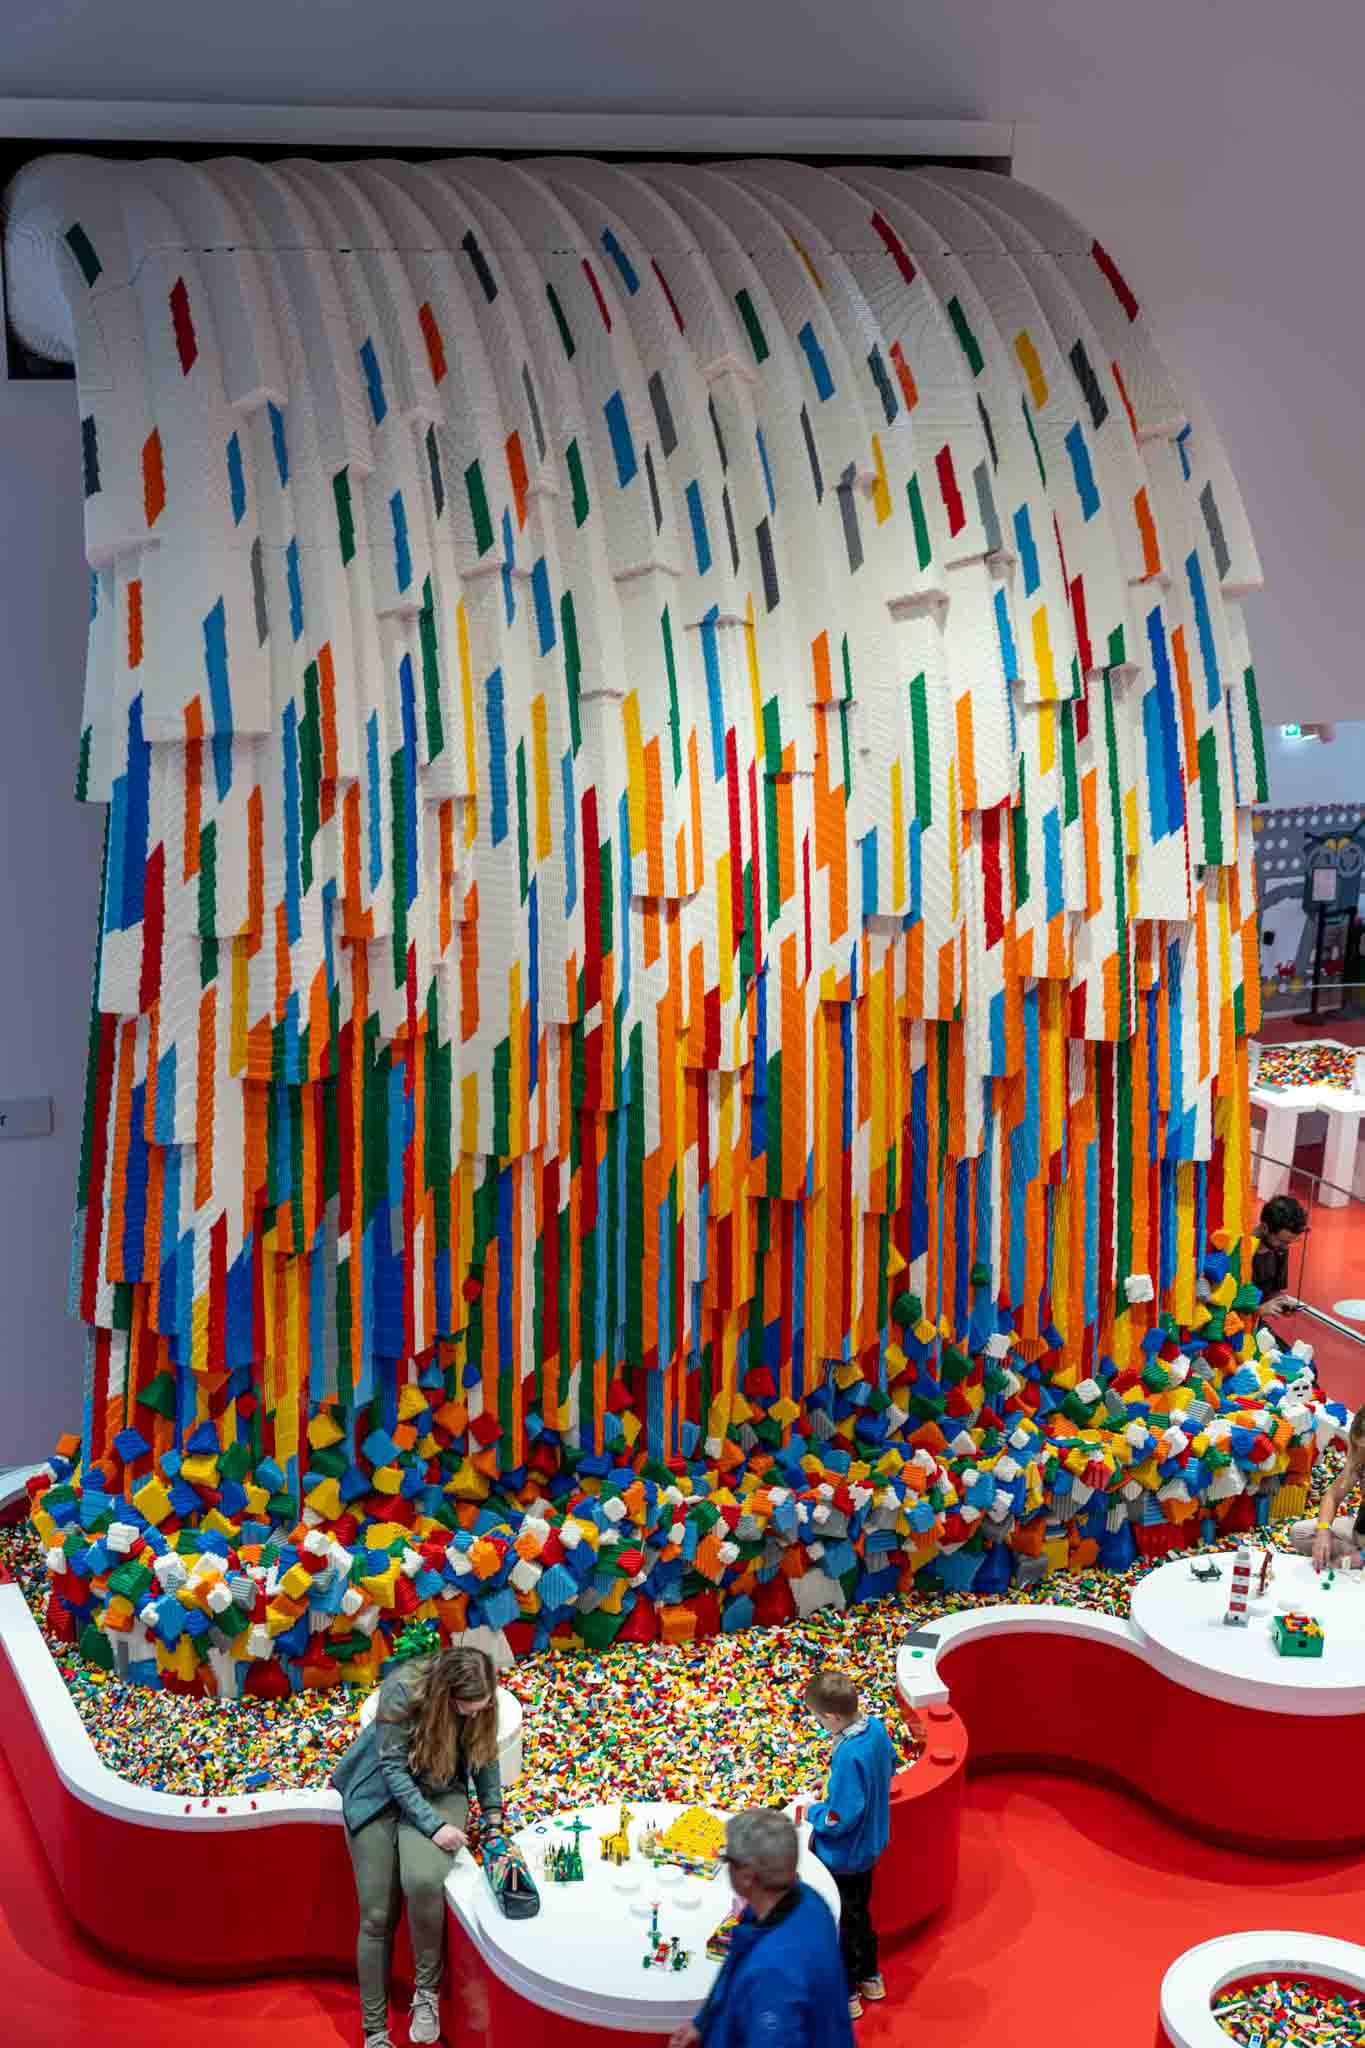 a large wall made of colorful blocks